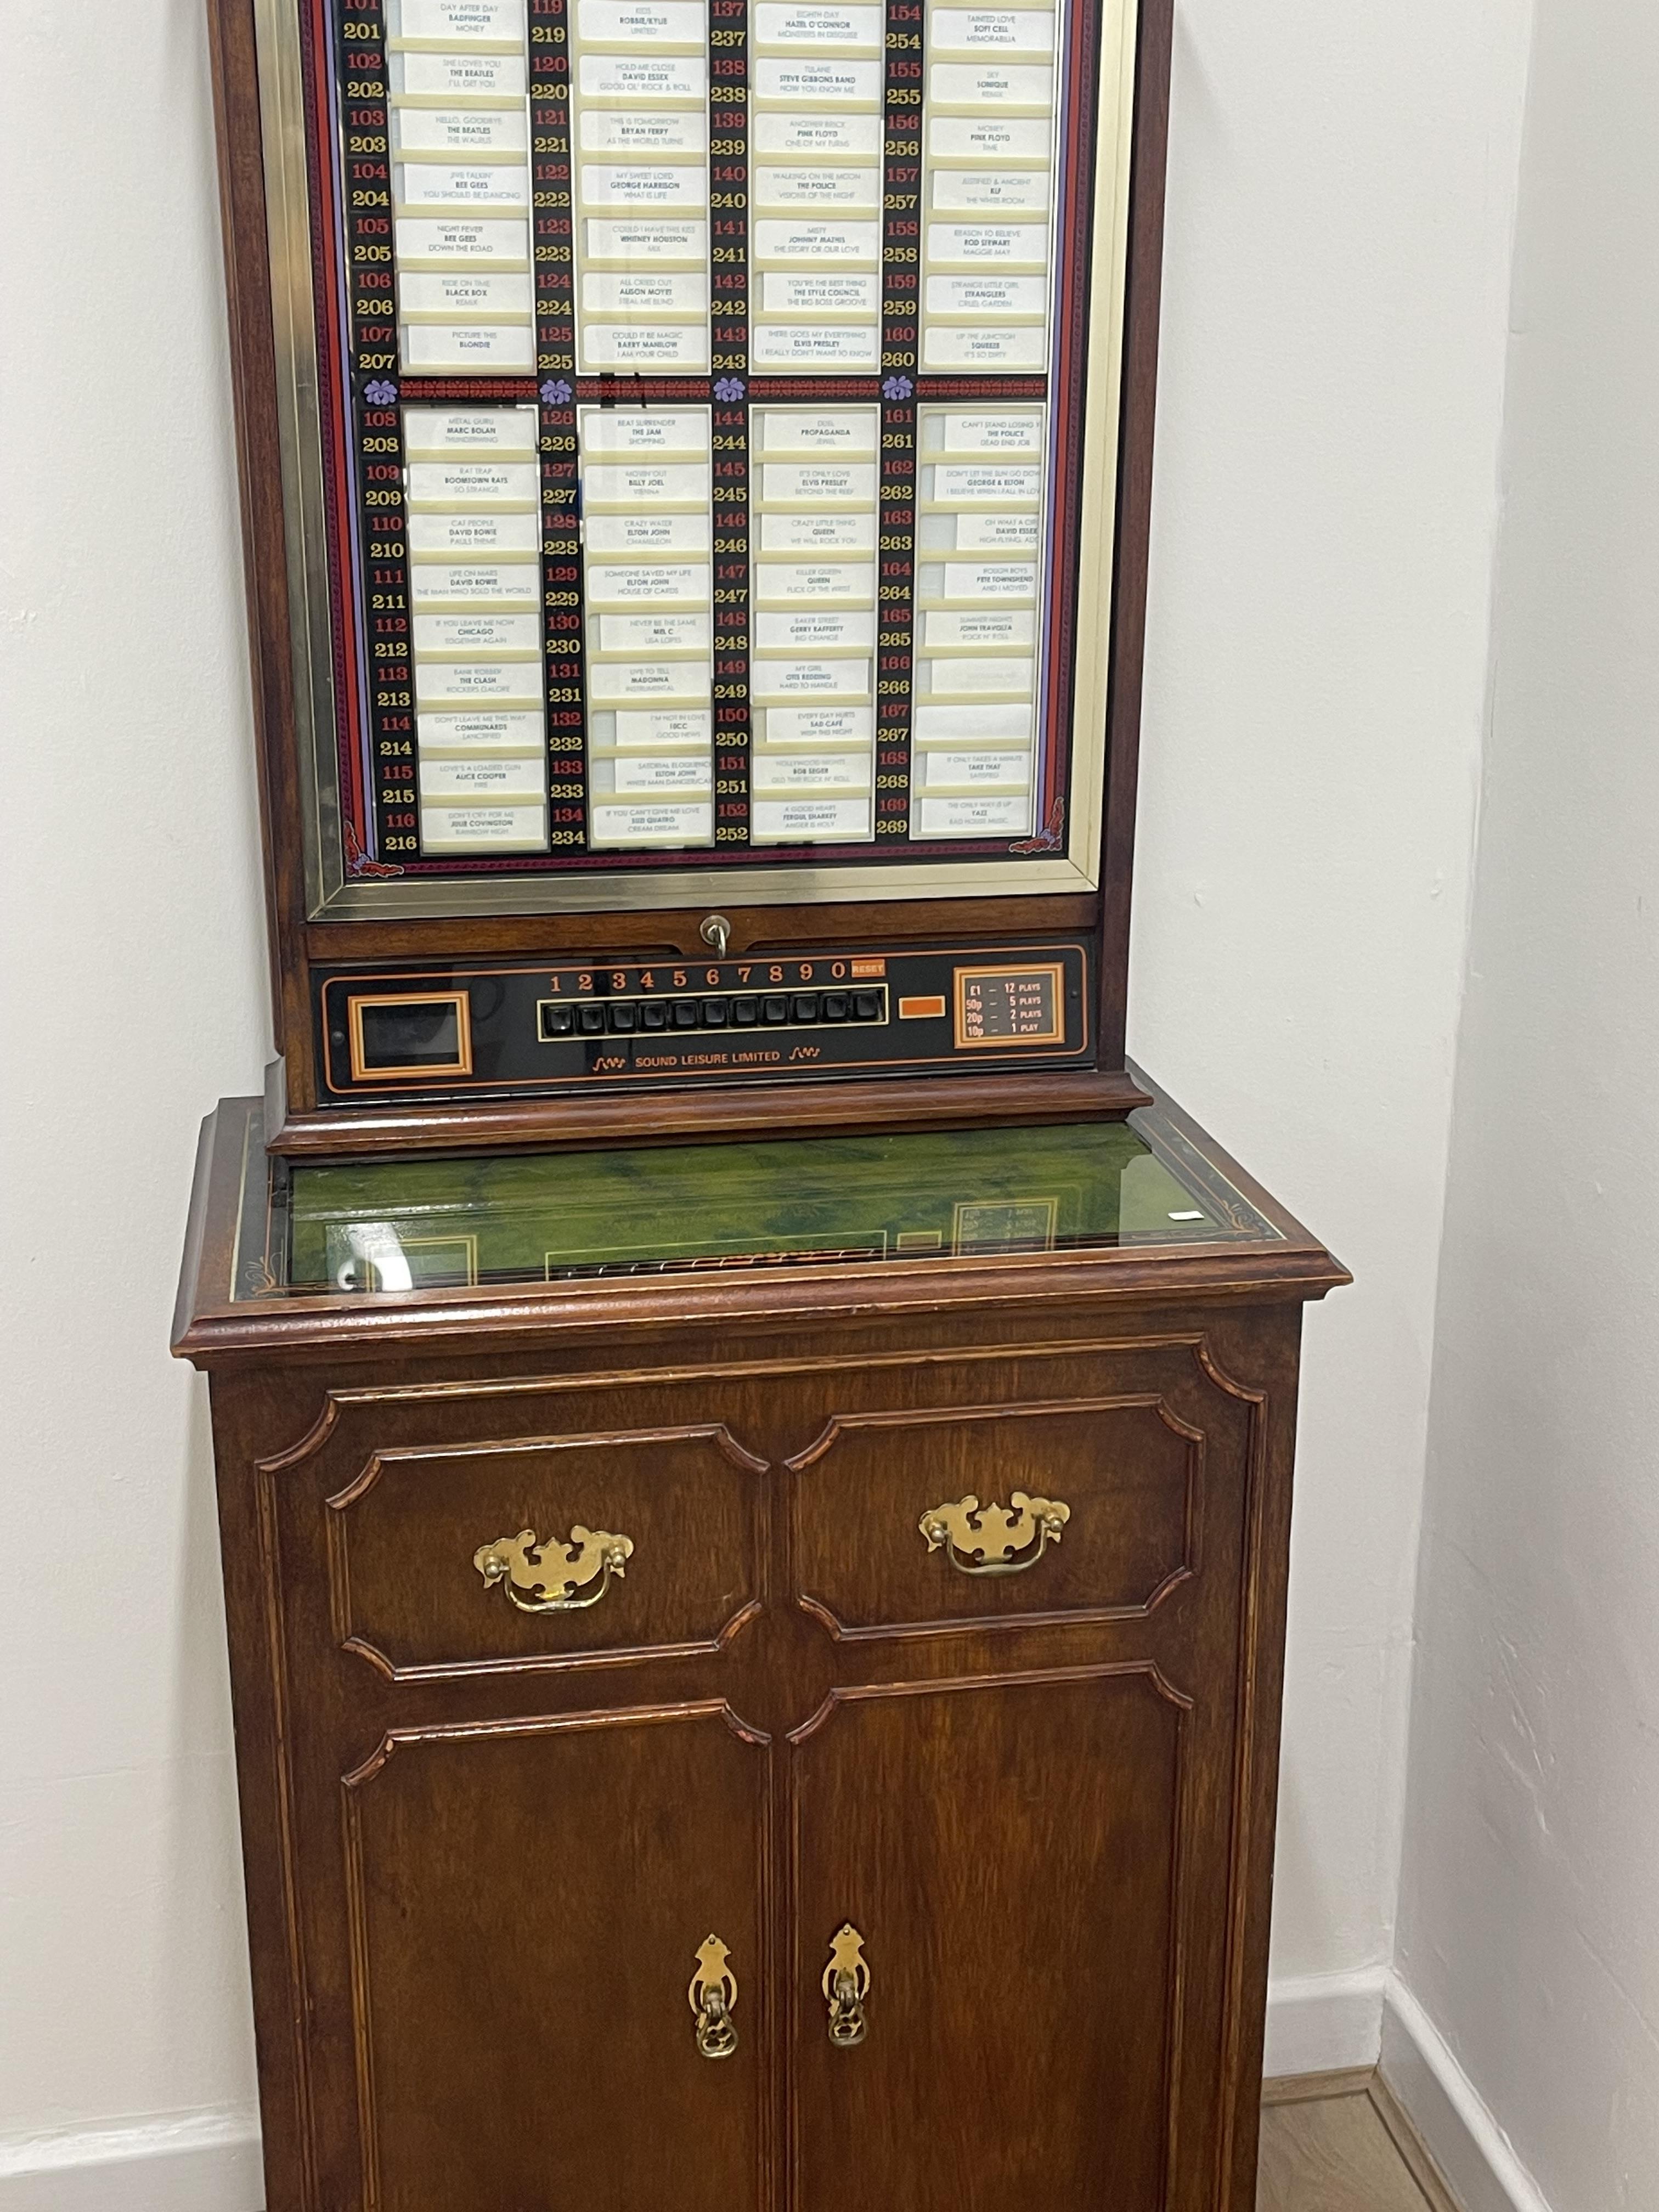 Regency “Sound leisure limited” juke box, with key & large quantity of 45’s records - H172 W41 L64 - Image 2 of 7